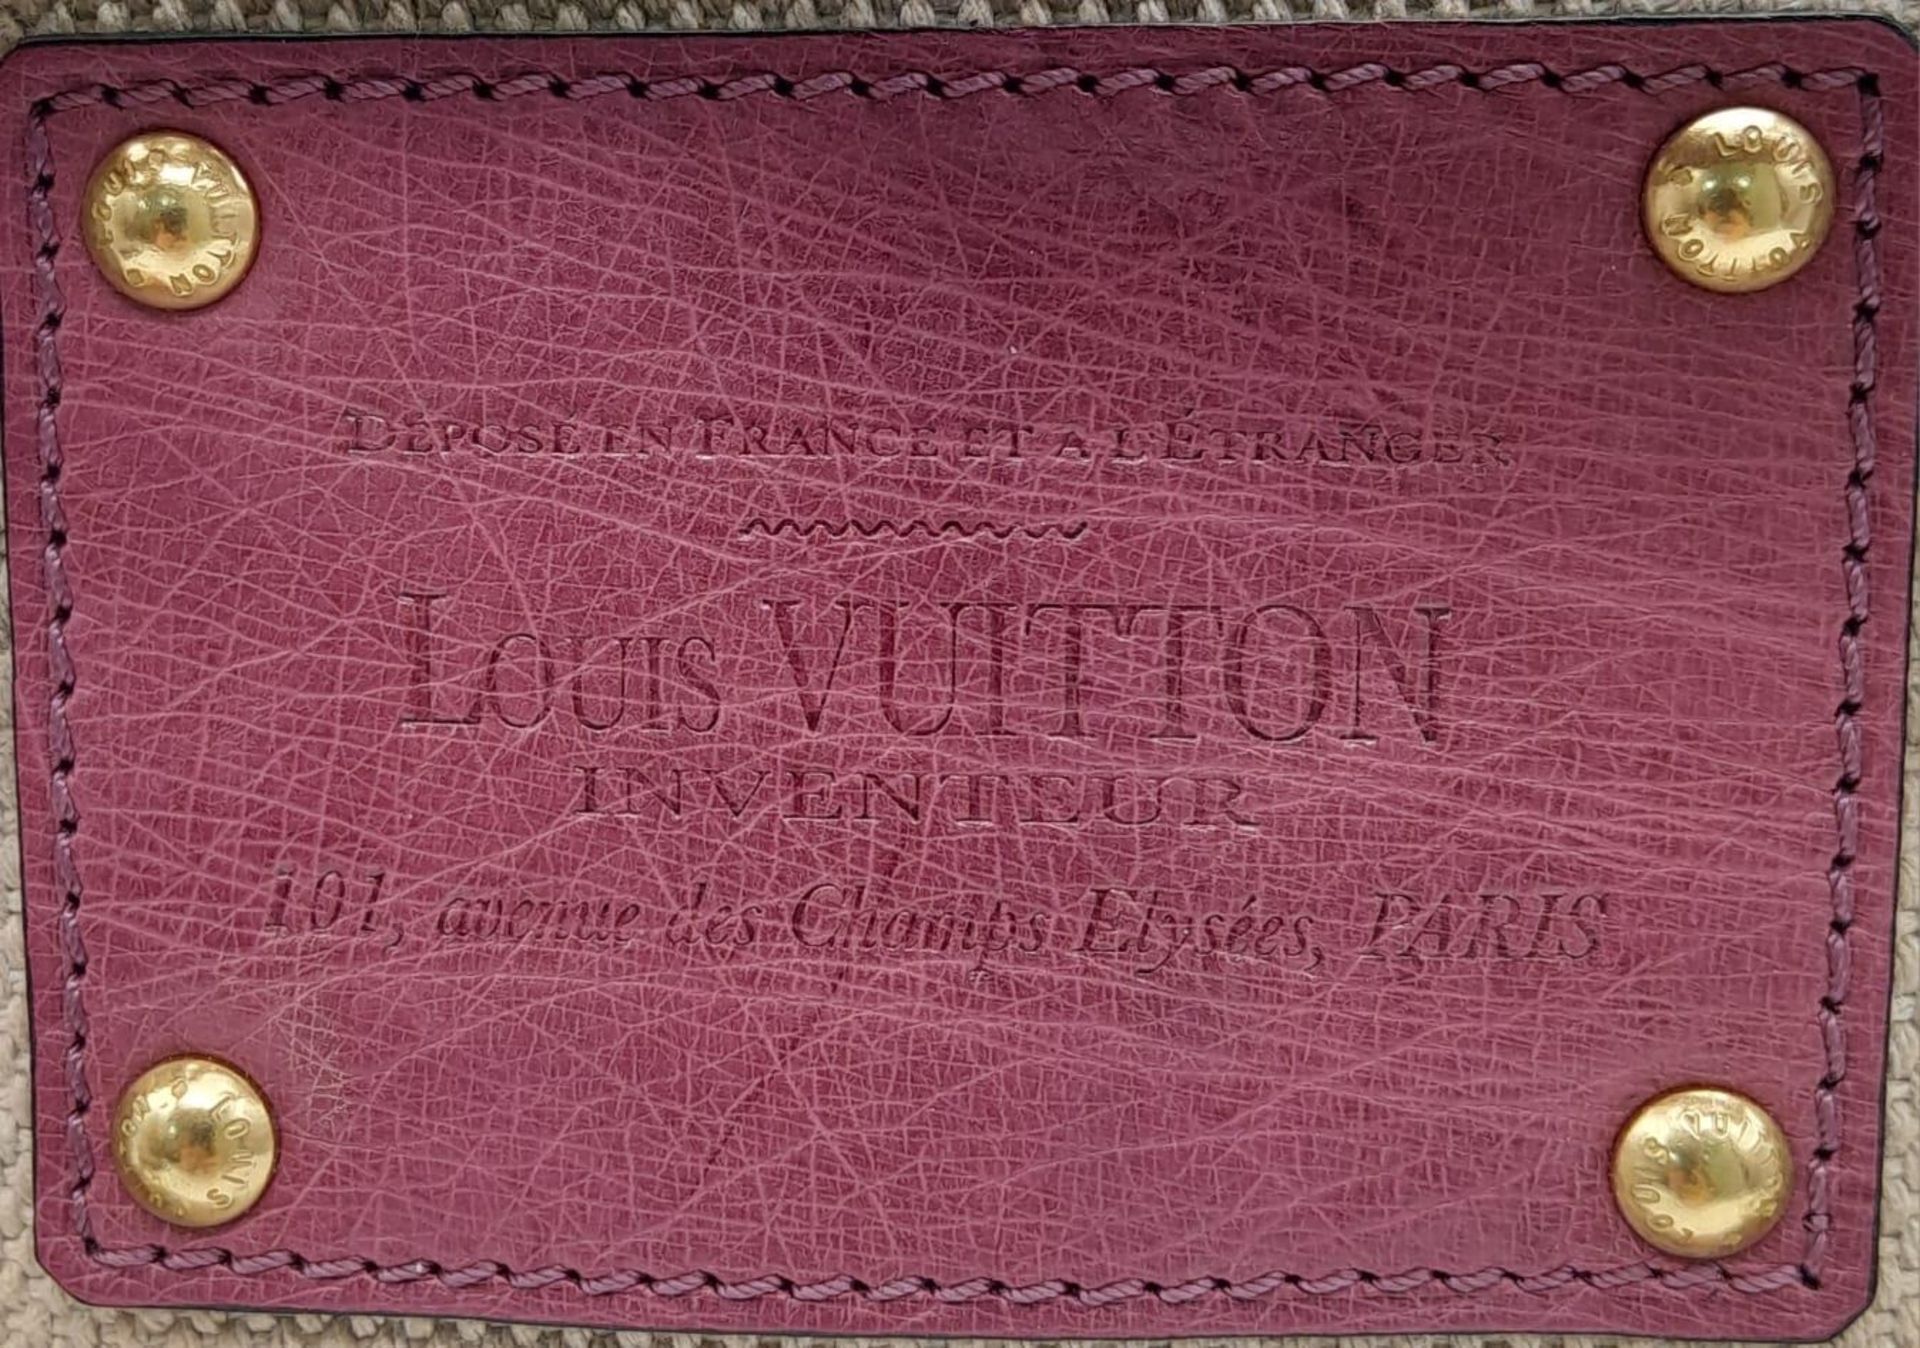 A LOUIS VUITTON PURPLE OSTRICH SAC EXPRESS GM PURSE LIMITED EDITION ONLY USED A COUPLE OF TIMES , IN - Image 8 of 8